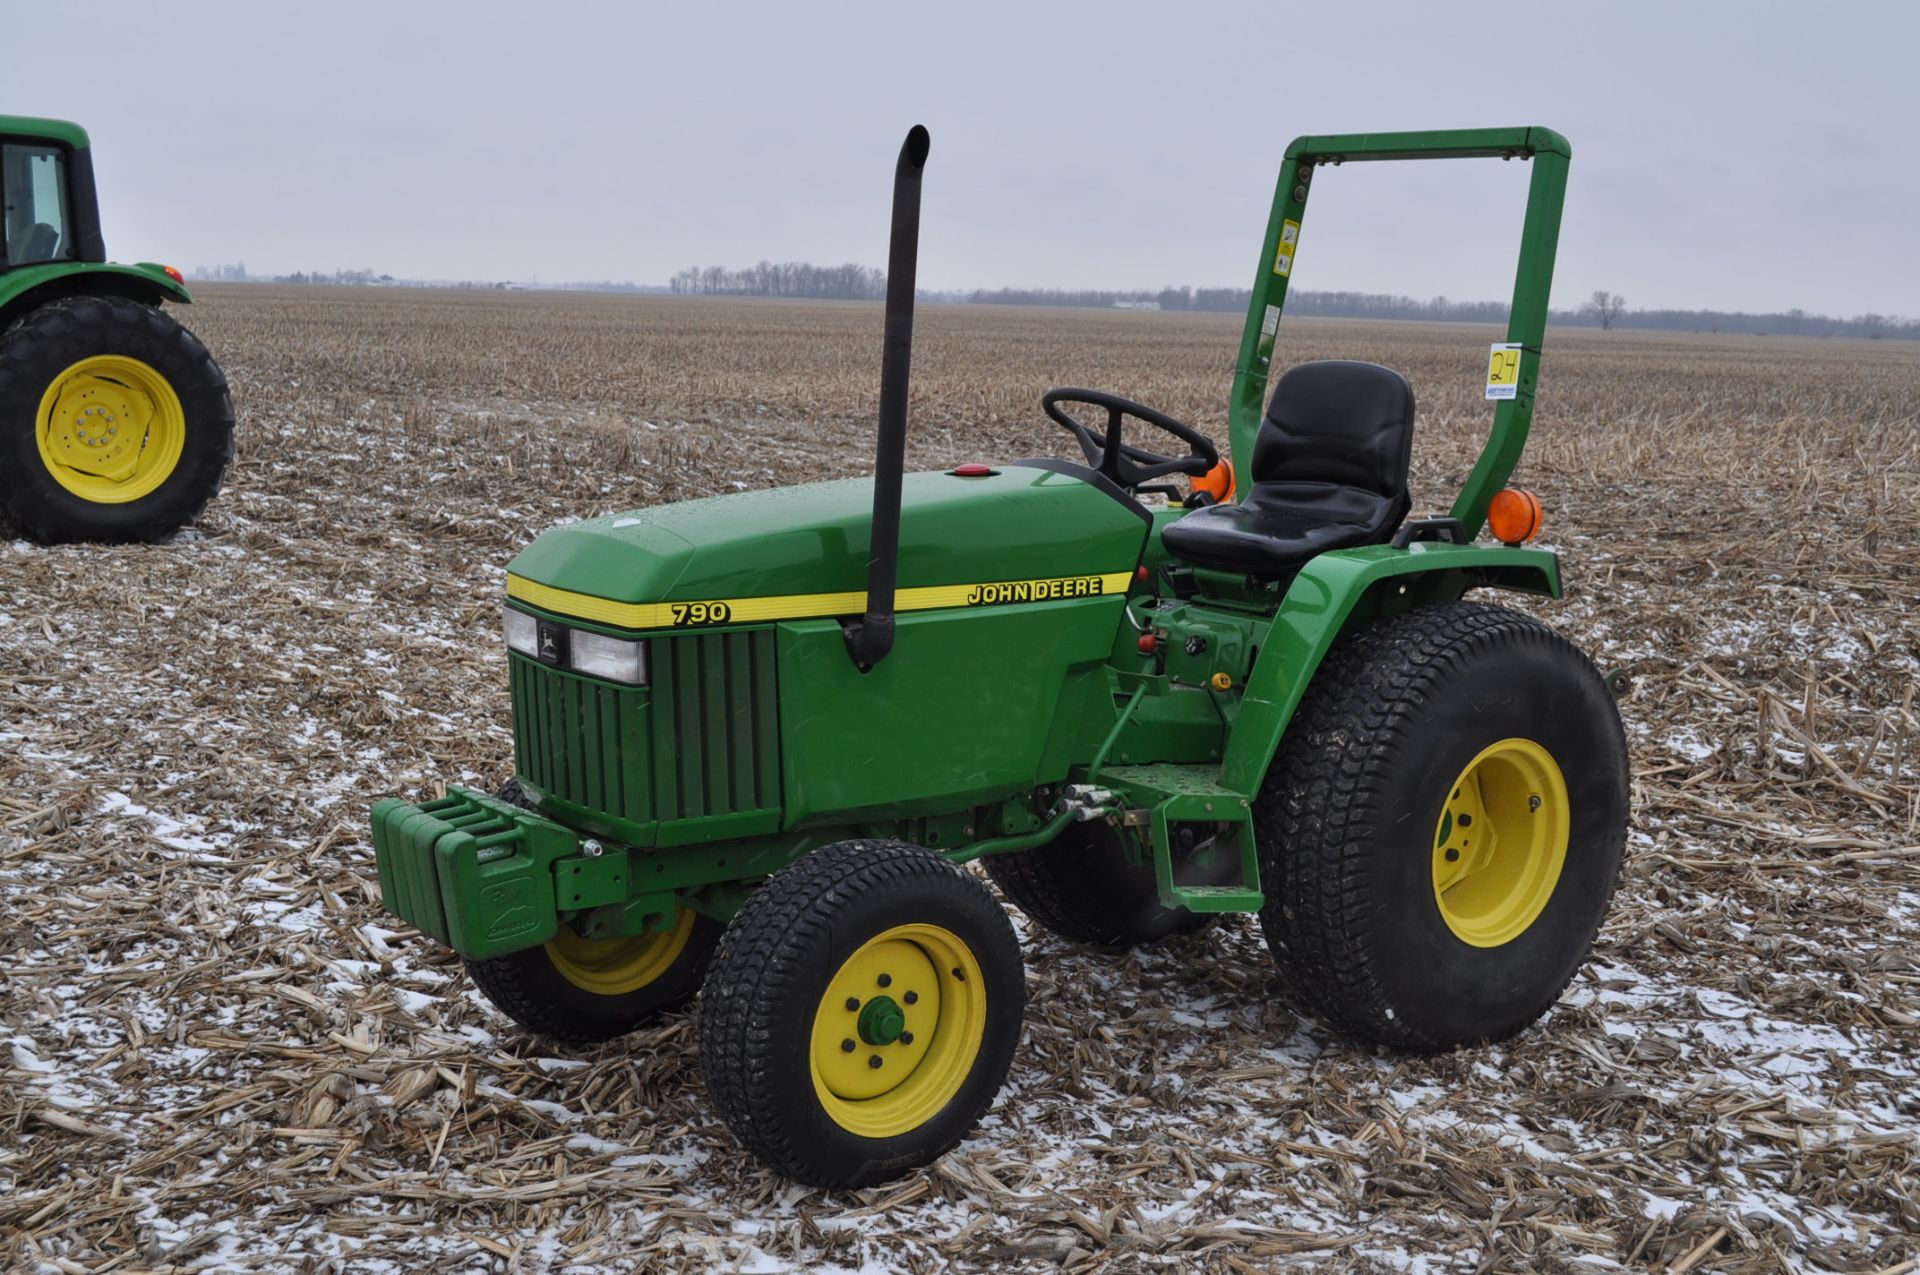 John Deere 790 compact tractor, 2WD, front wts, diesel, mid-mount remotes, 3 pt, 540 PTO, 13.6-16